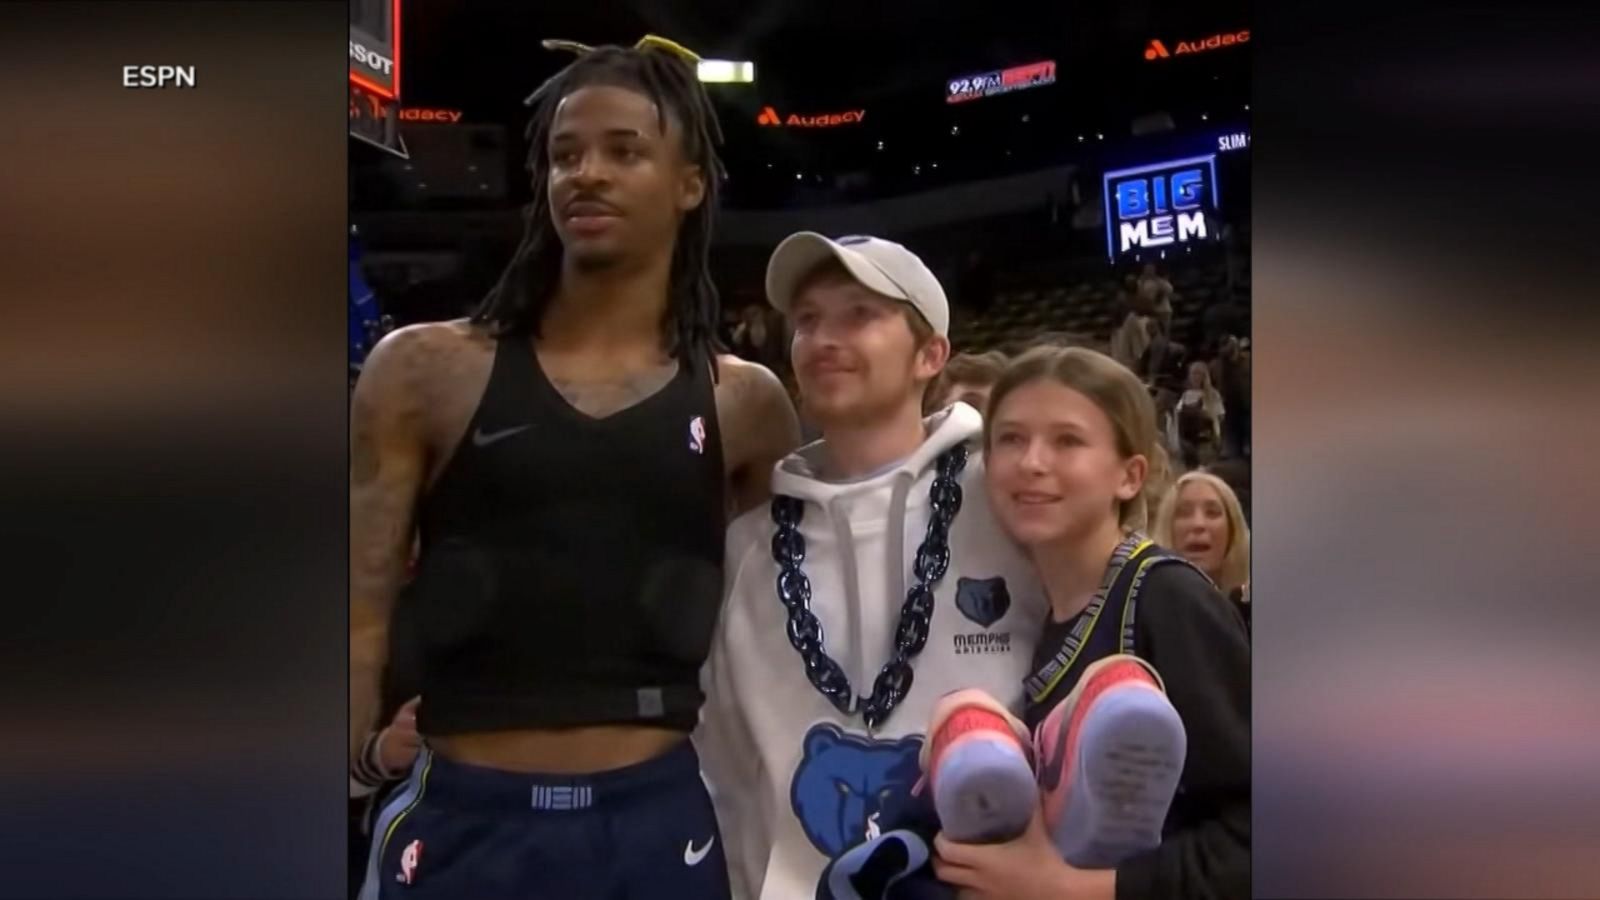 NBA player gives gift to young fan who had memento stolen - Good